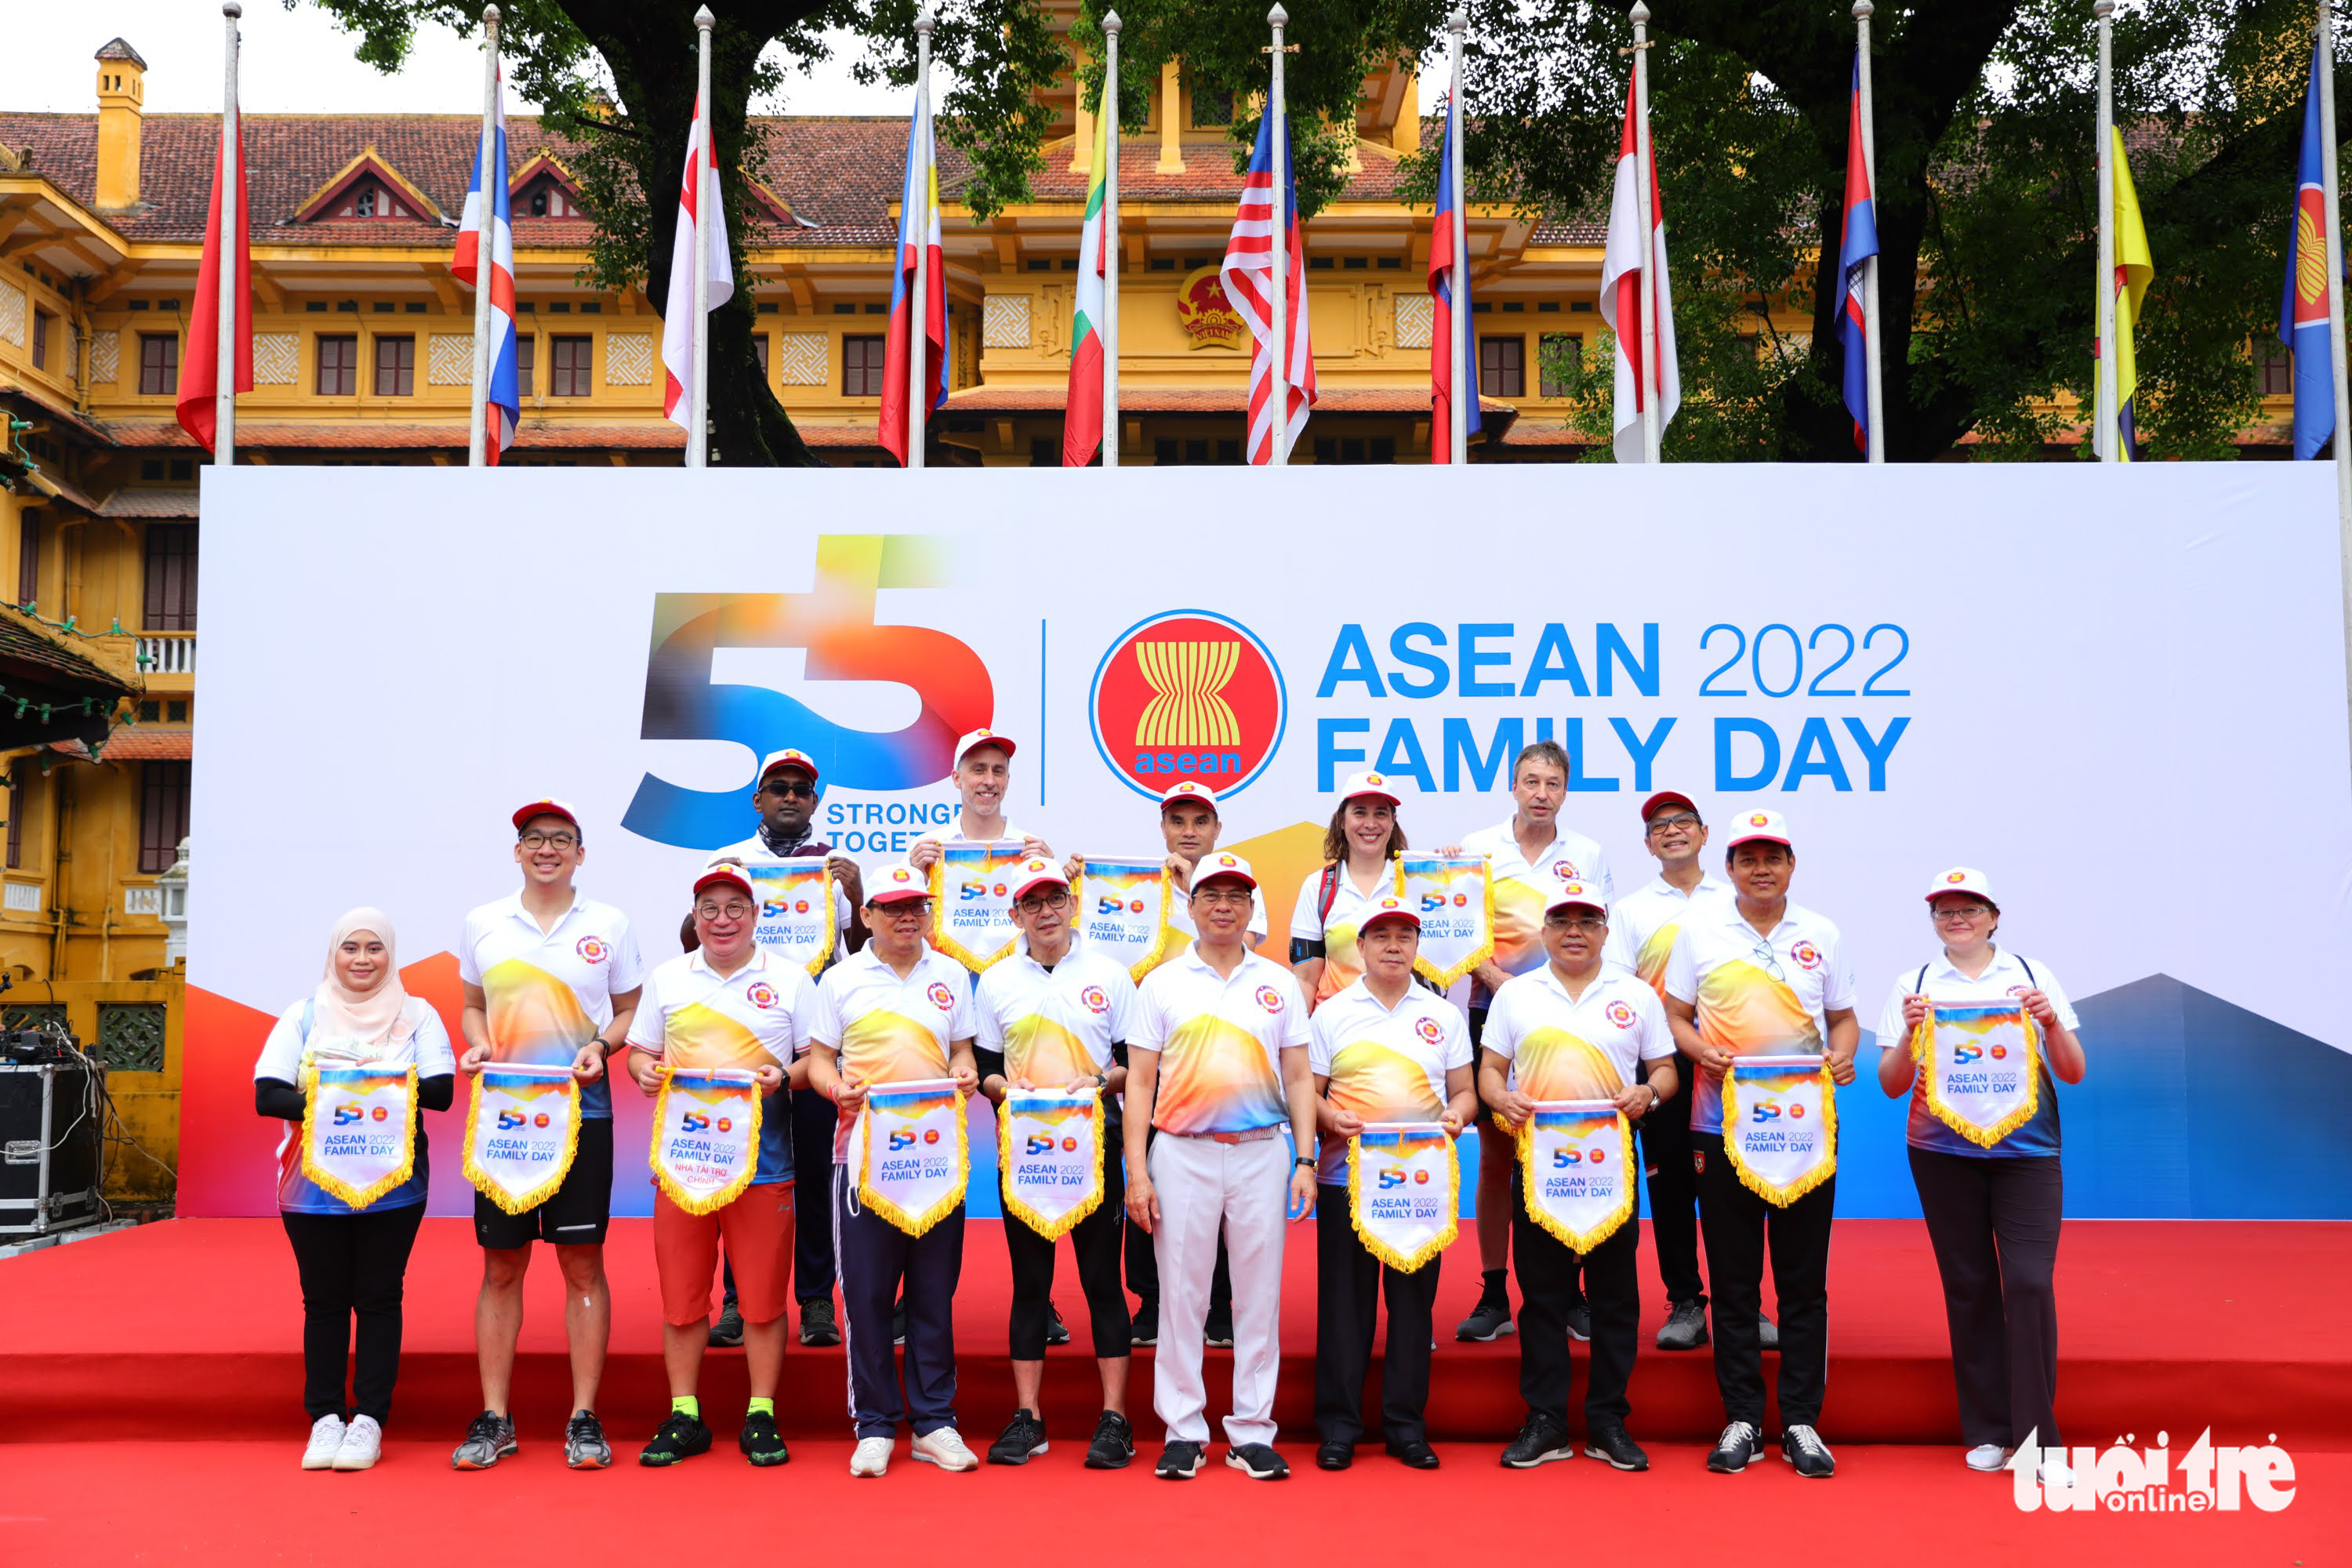 Delegates pose for a photo at the ASEAN Family Day 2022 in Hanoi, August 13, 2022. Photo: Danh Khang / Tuoi Tre